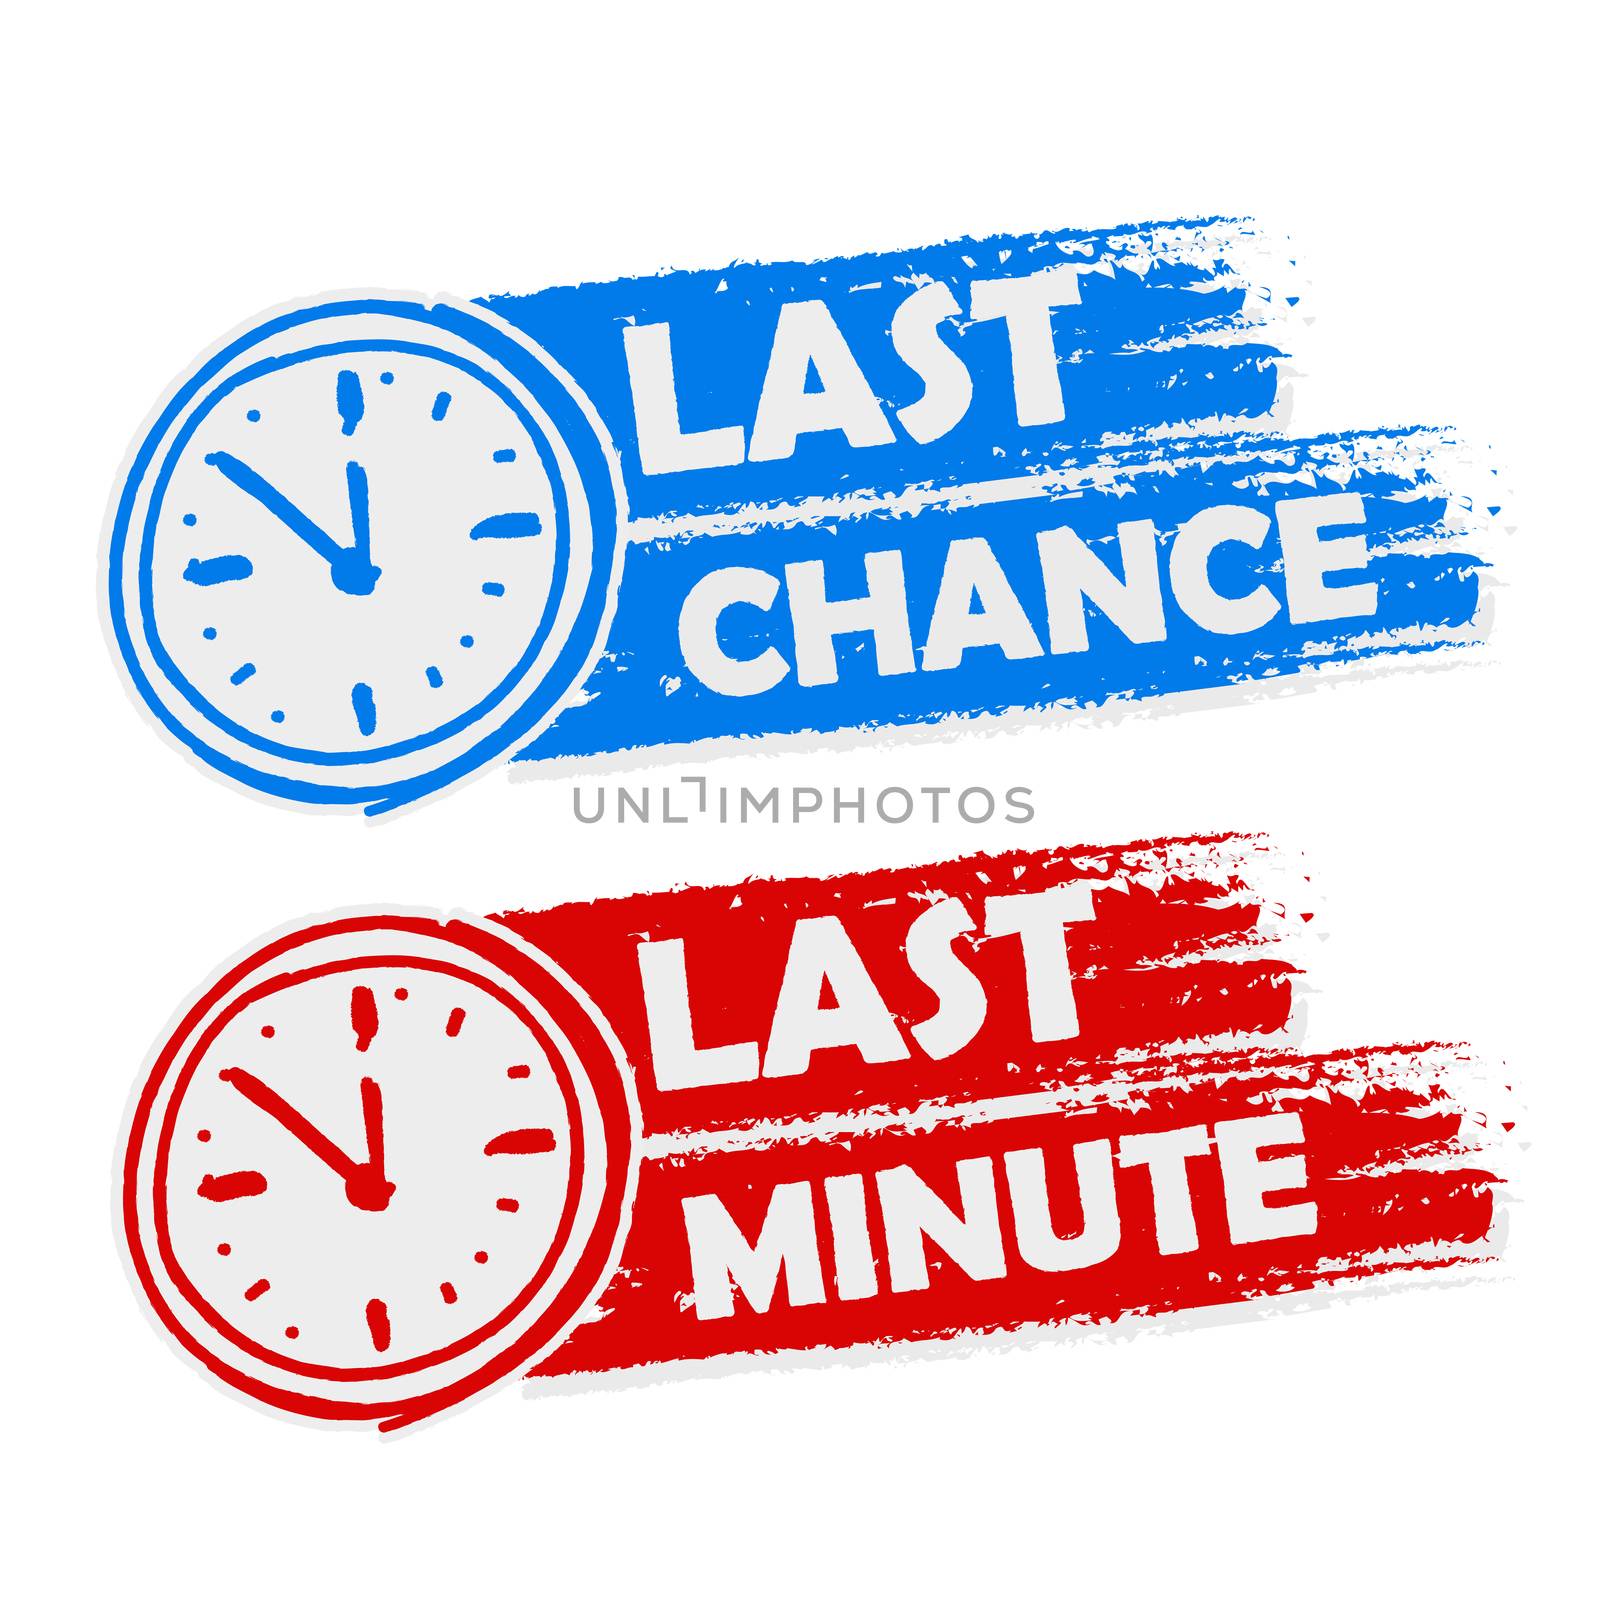 last chance and last minute offer with clock signs banners - text in blue and red drawn labels with symbols, business commerce shopping concept